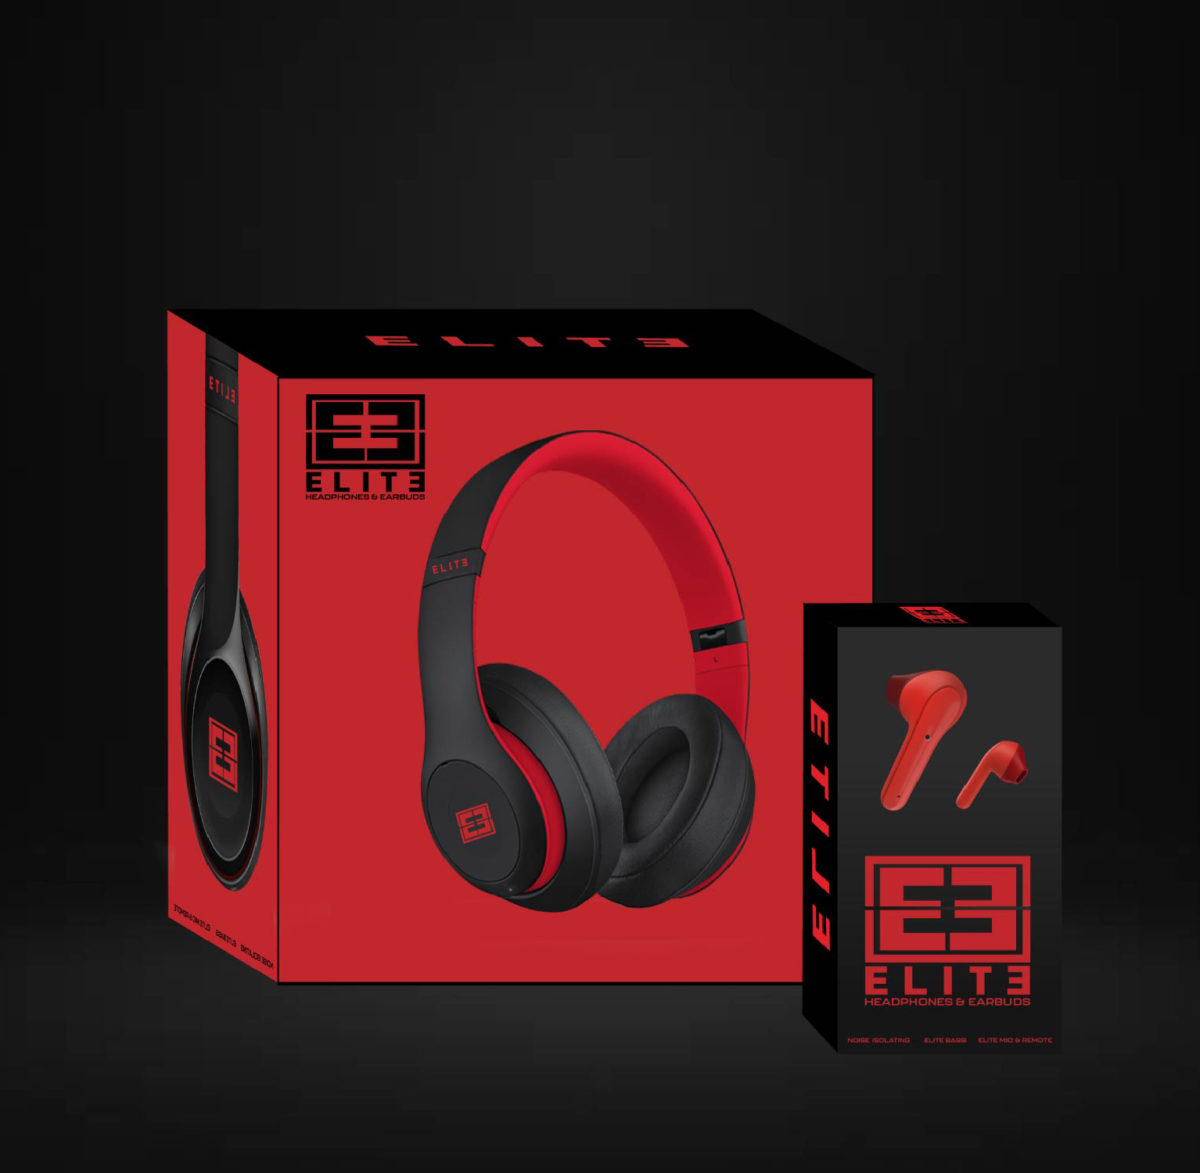 bright red and black box with image of headphones. Packaging design by Jose Rosado '22, Graphic Design